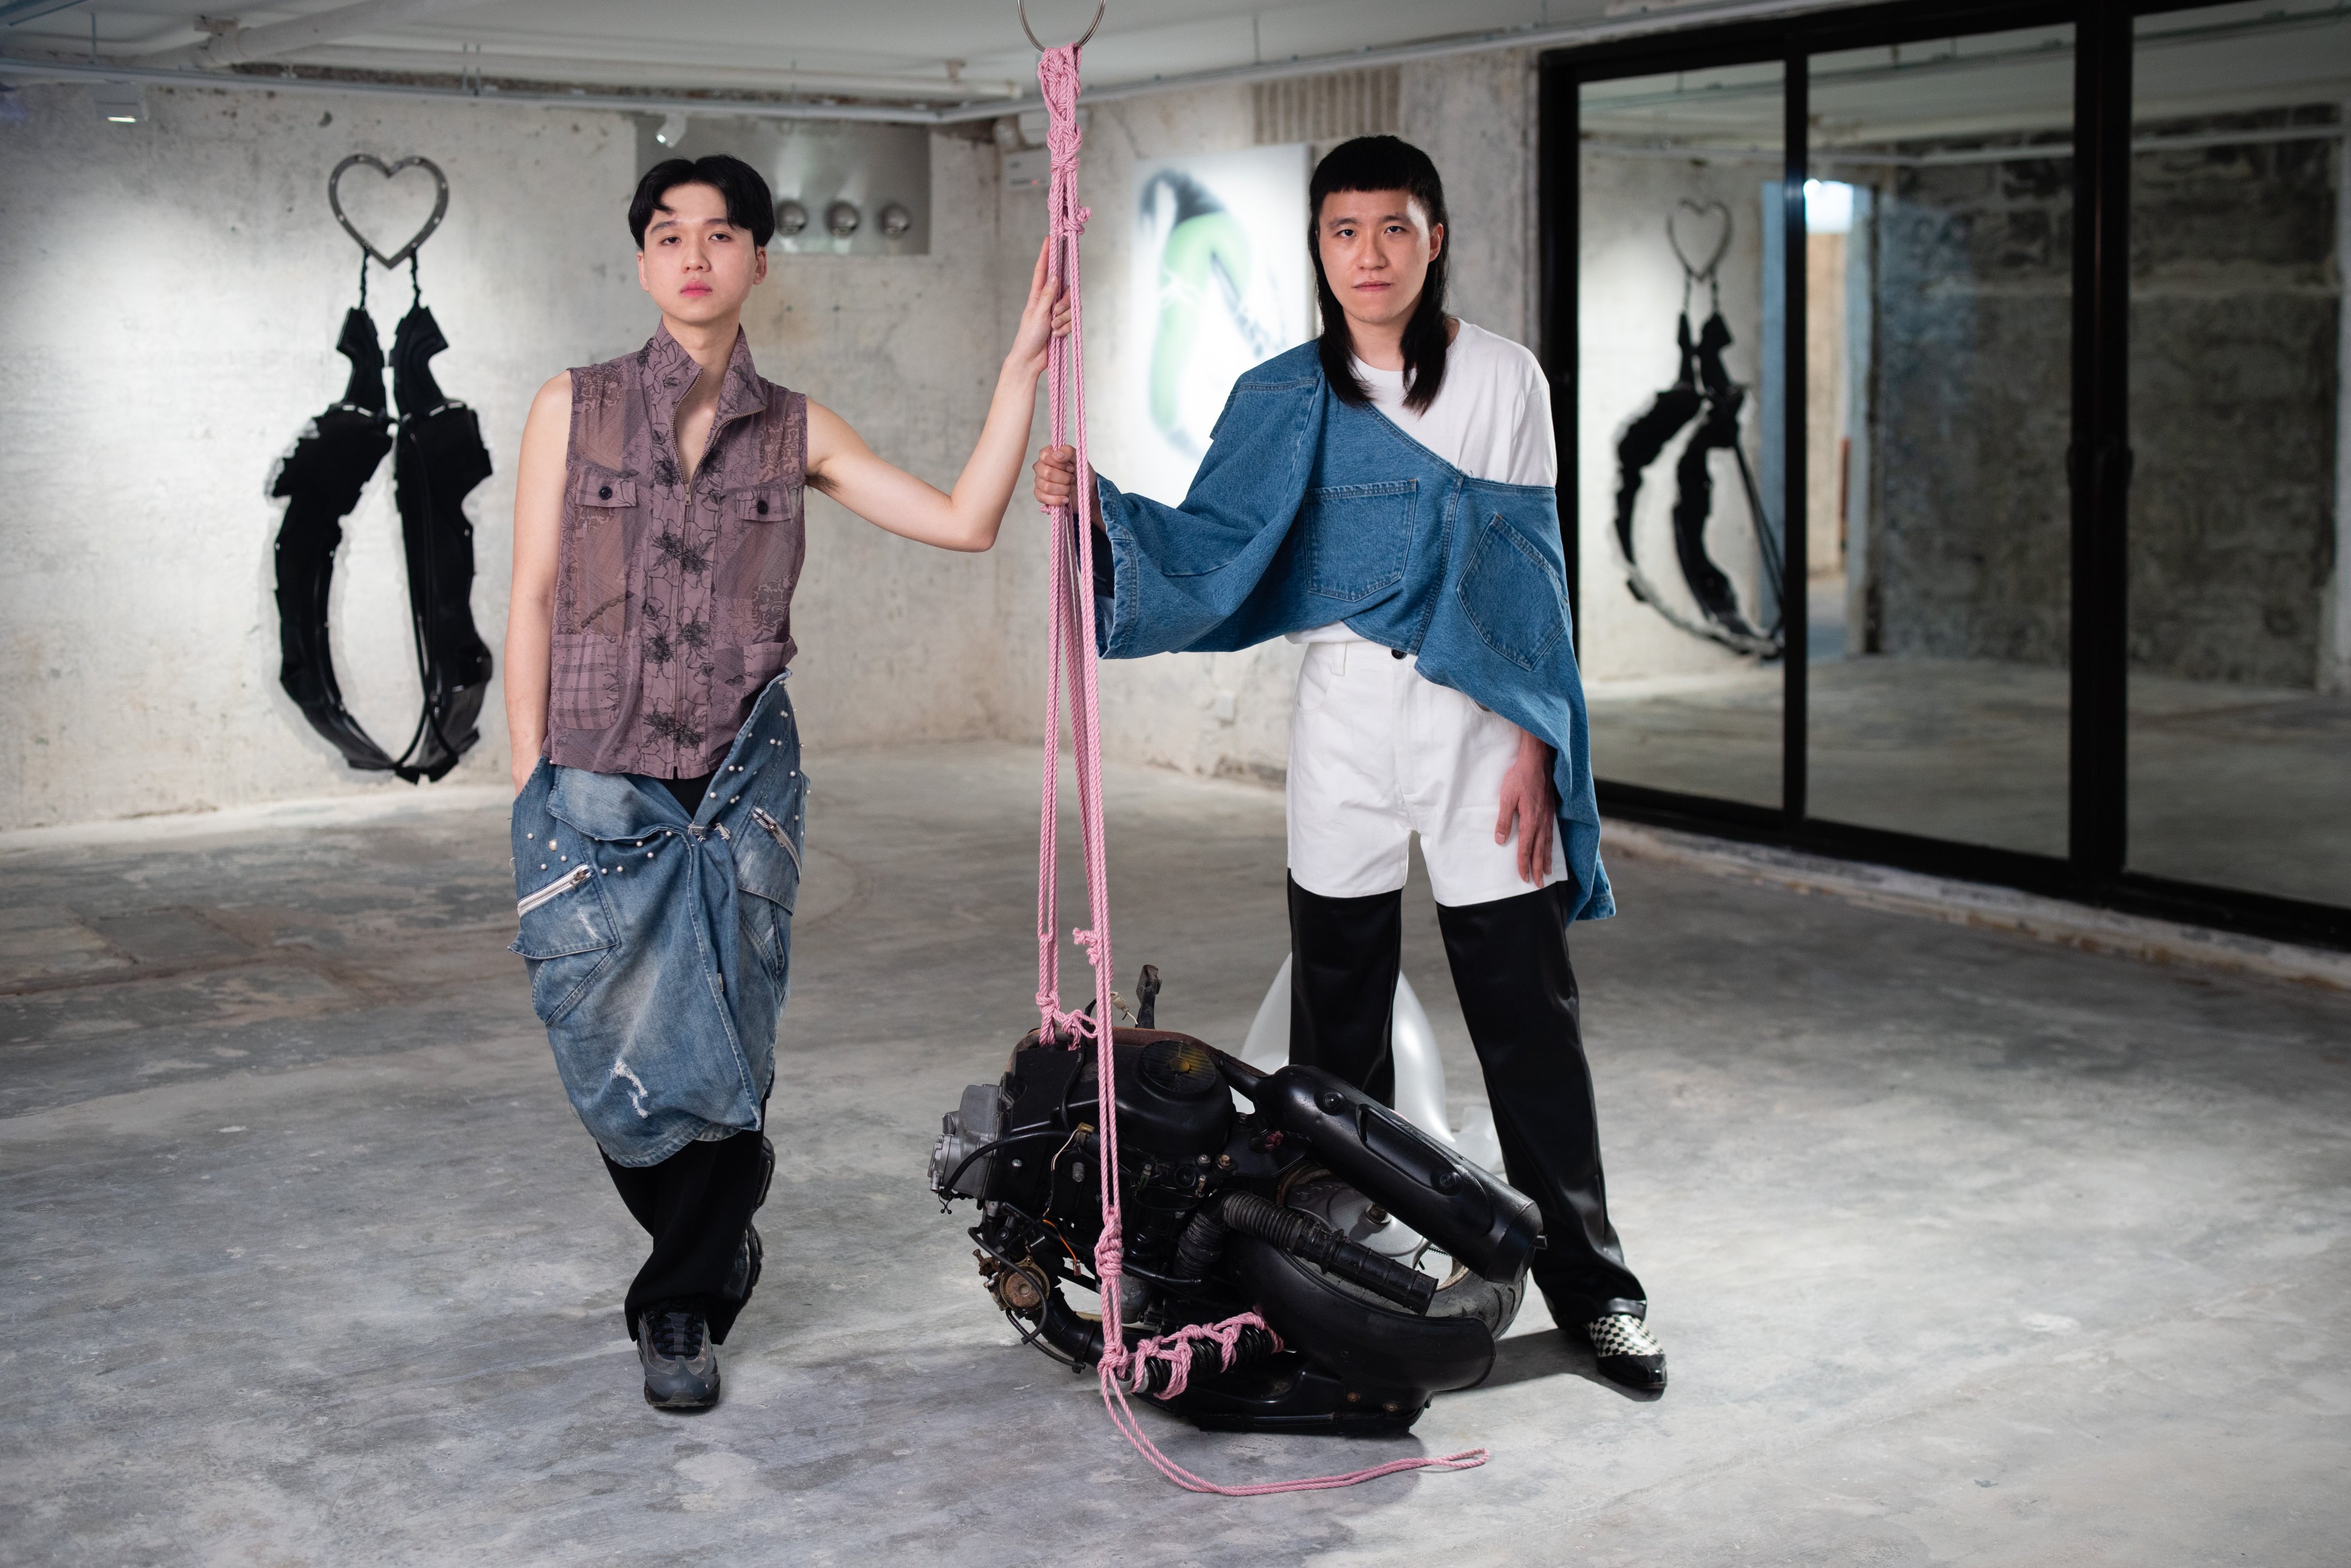 The Supper Club, which will run at Hong Kong’s Fringe Club for six nights at the end of March, will be a more casual presentation of art, put together by 22 local and international galleries. Hong Kong artist duo Virtue Village (above) will perform at Supper Club. Photo: PHD Group